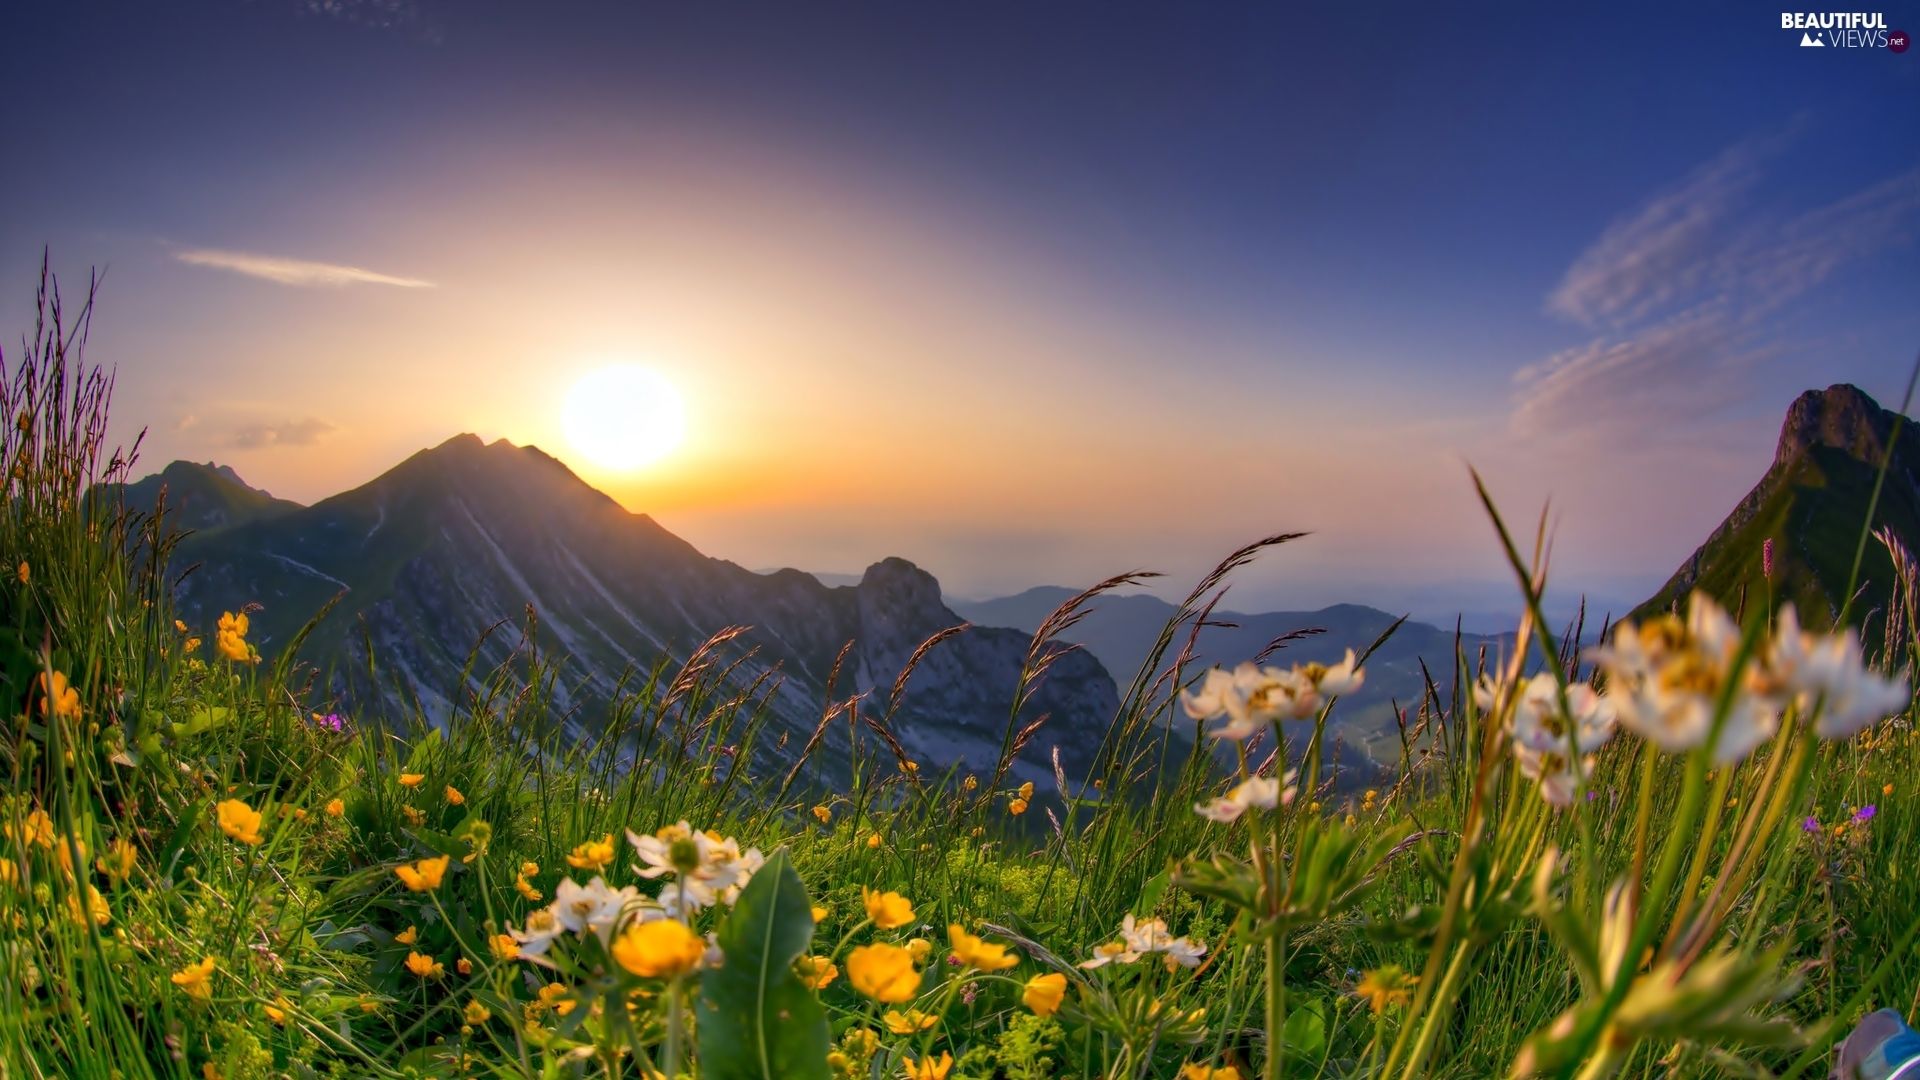 Sunrise Spring Wallpapers Wallpaper Cave